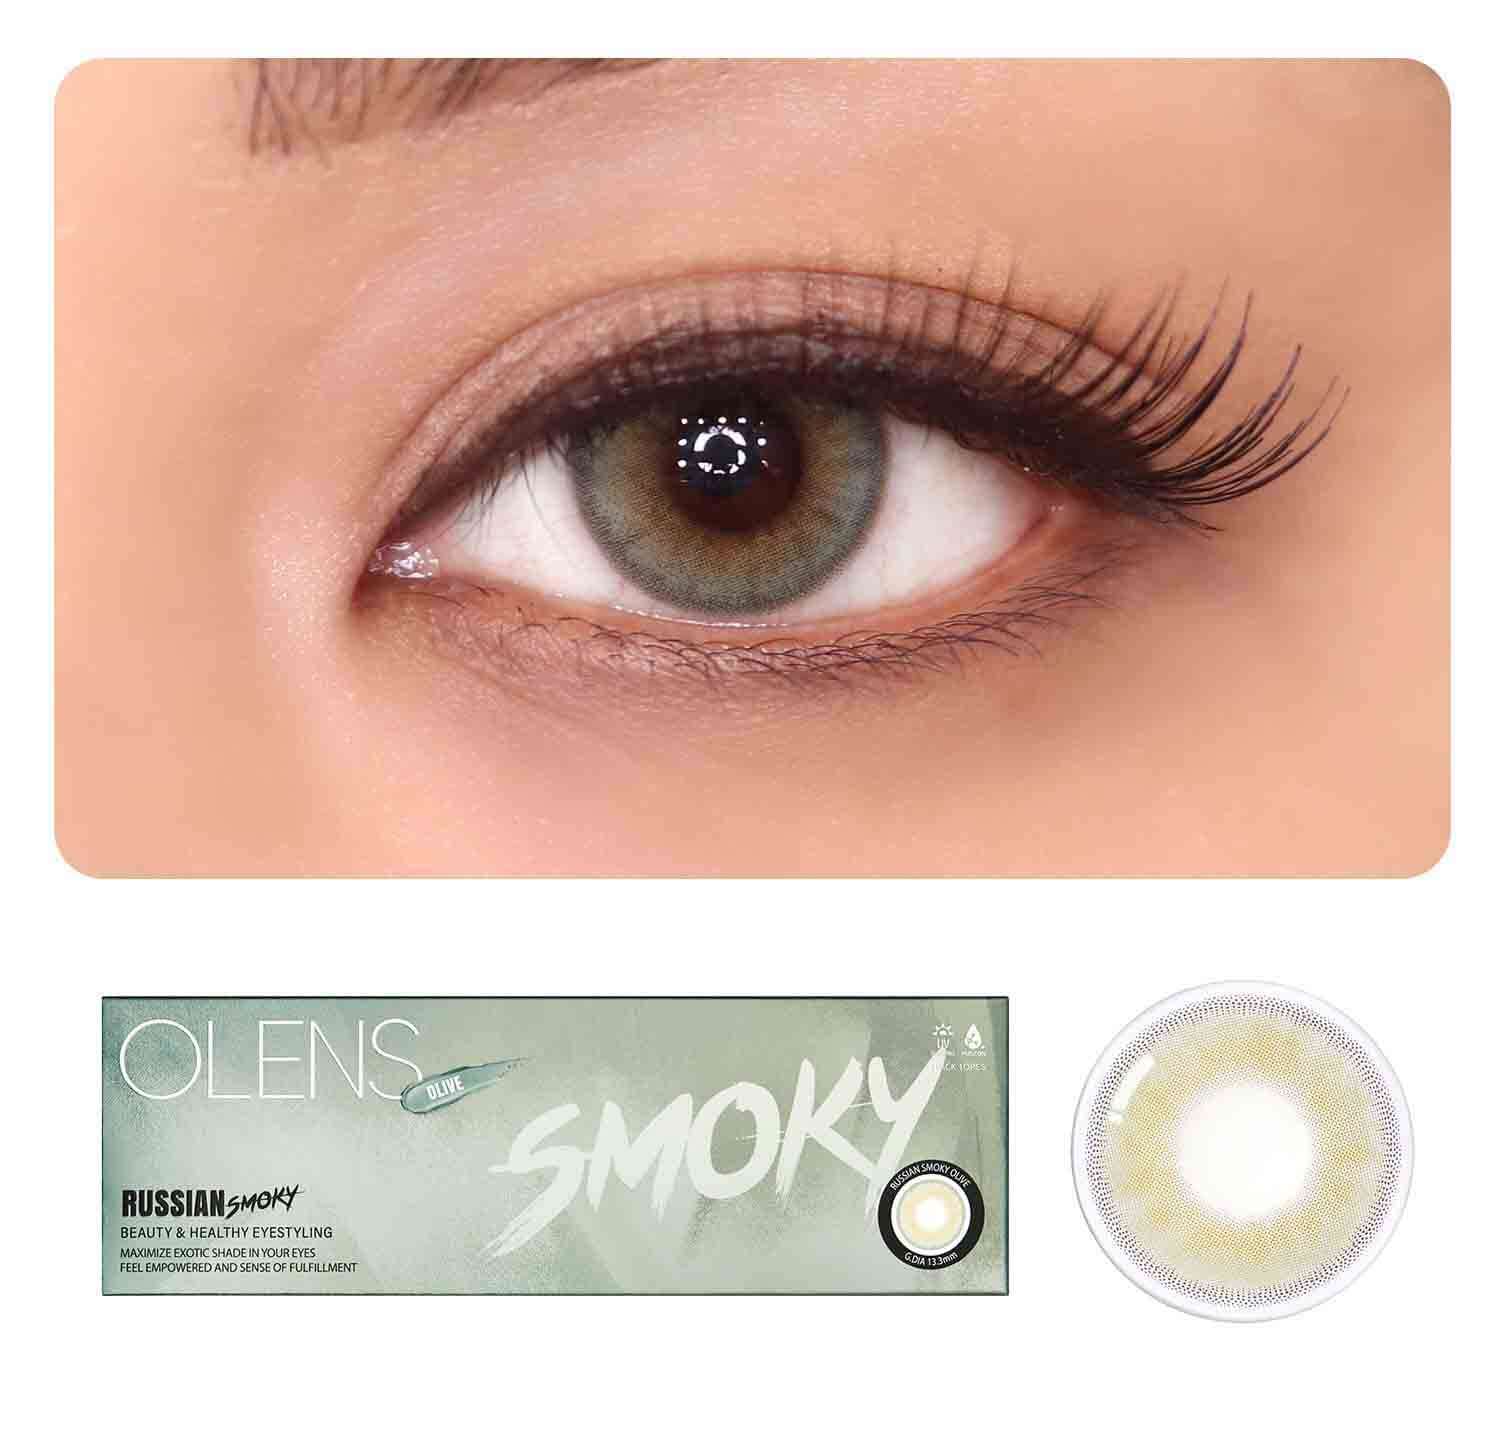 OLENS Premium Color Contact Lens Russian smoky olive | Green color lens in combo kit at affordable price | o-lens.co.in.